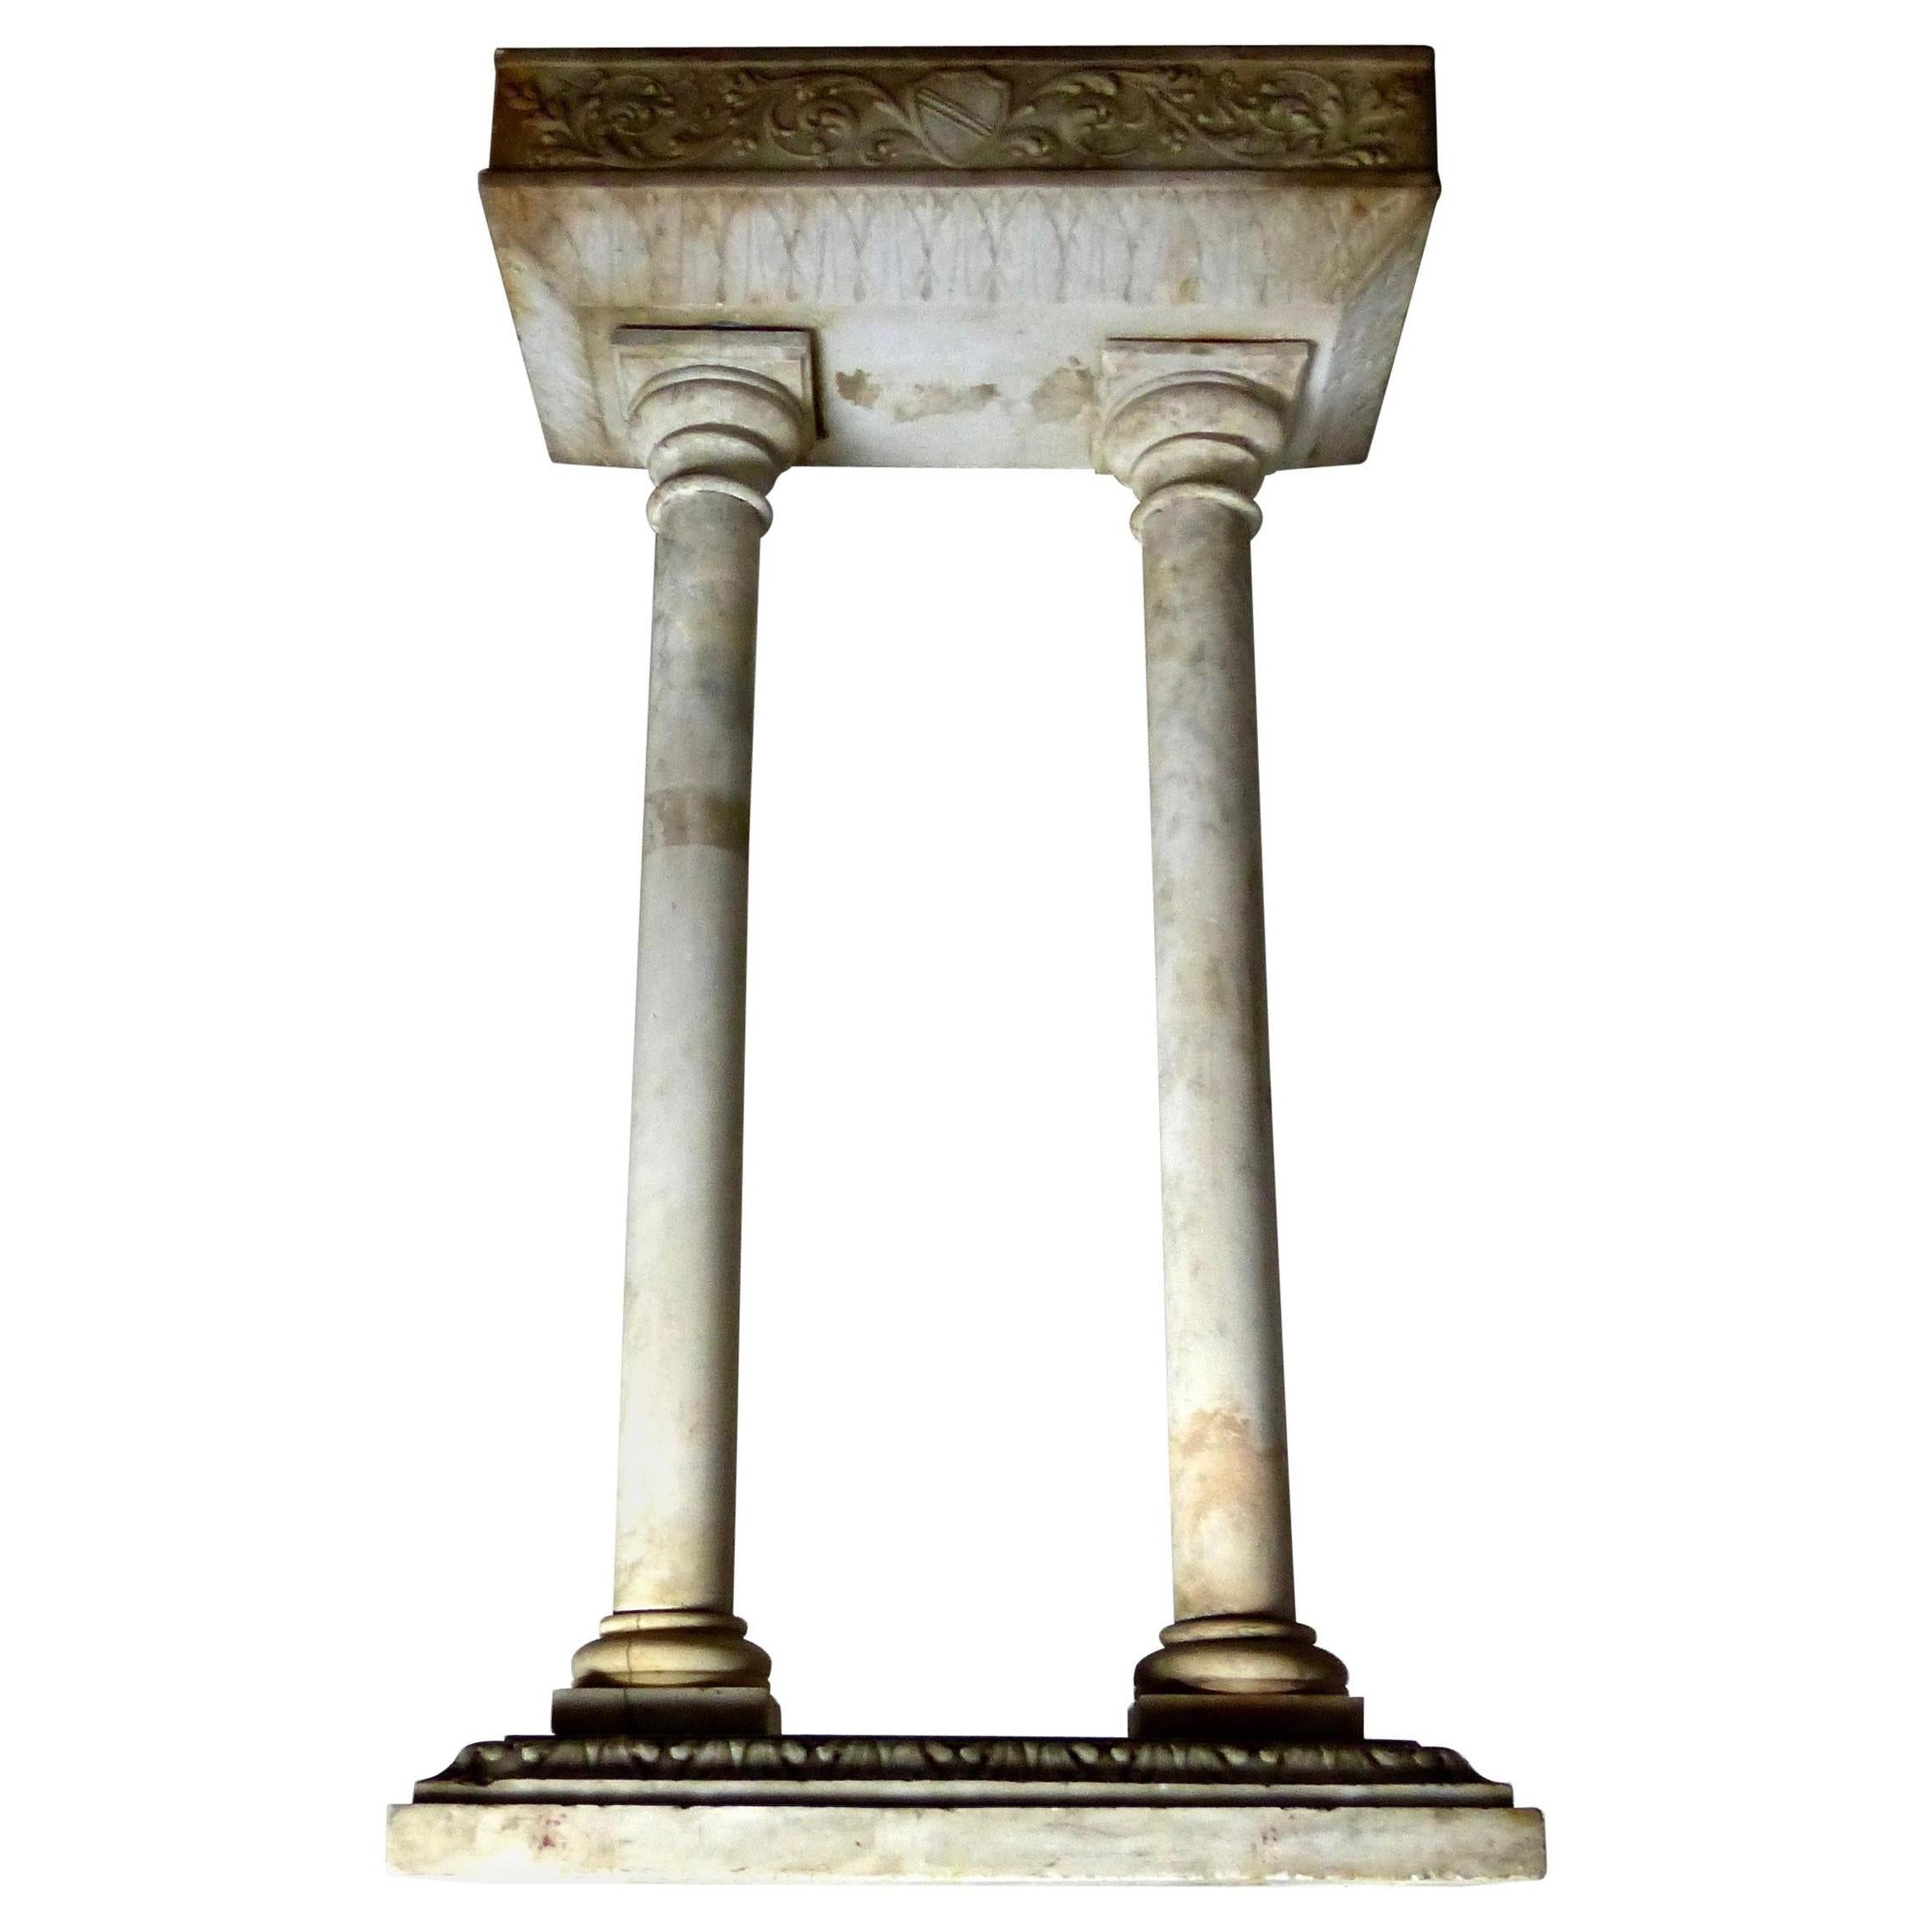 Antique double column formal stand, likely ecclesiastical, in hand carved Carrara marble. Lovely leaf motifs on the base and underneath its top. Use to display a sculpture or add a top to create a unique console table.
Btb Italian. However the